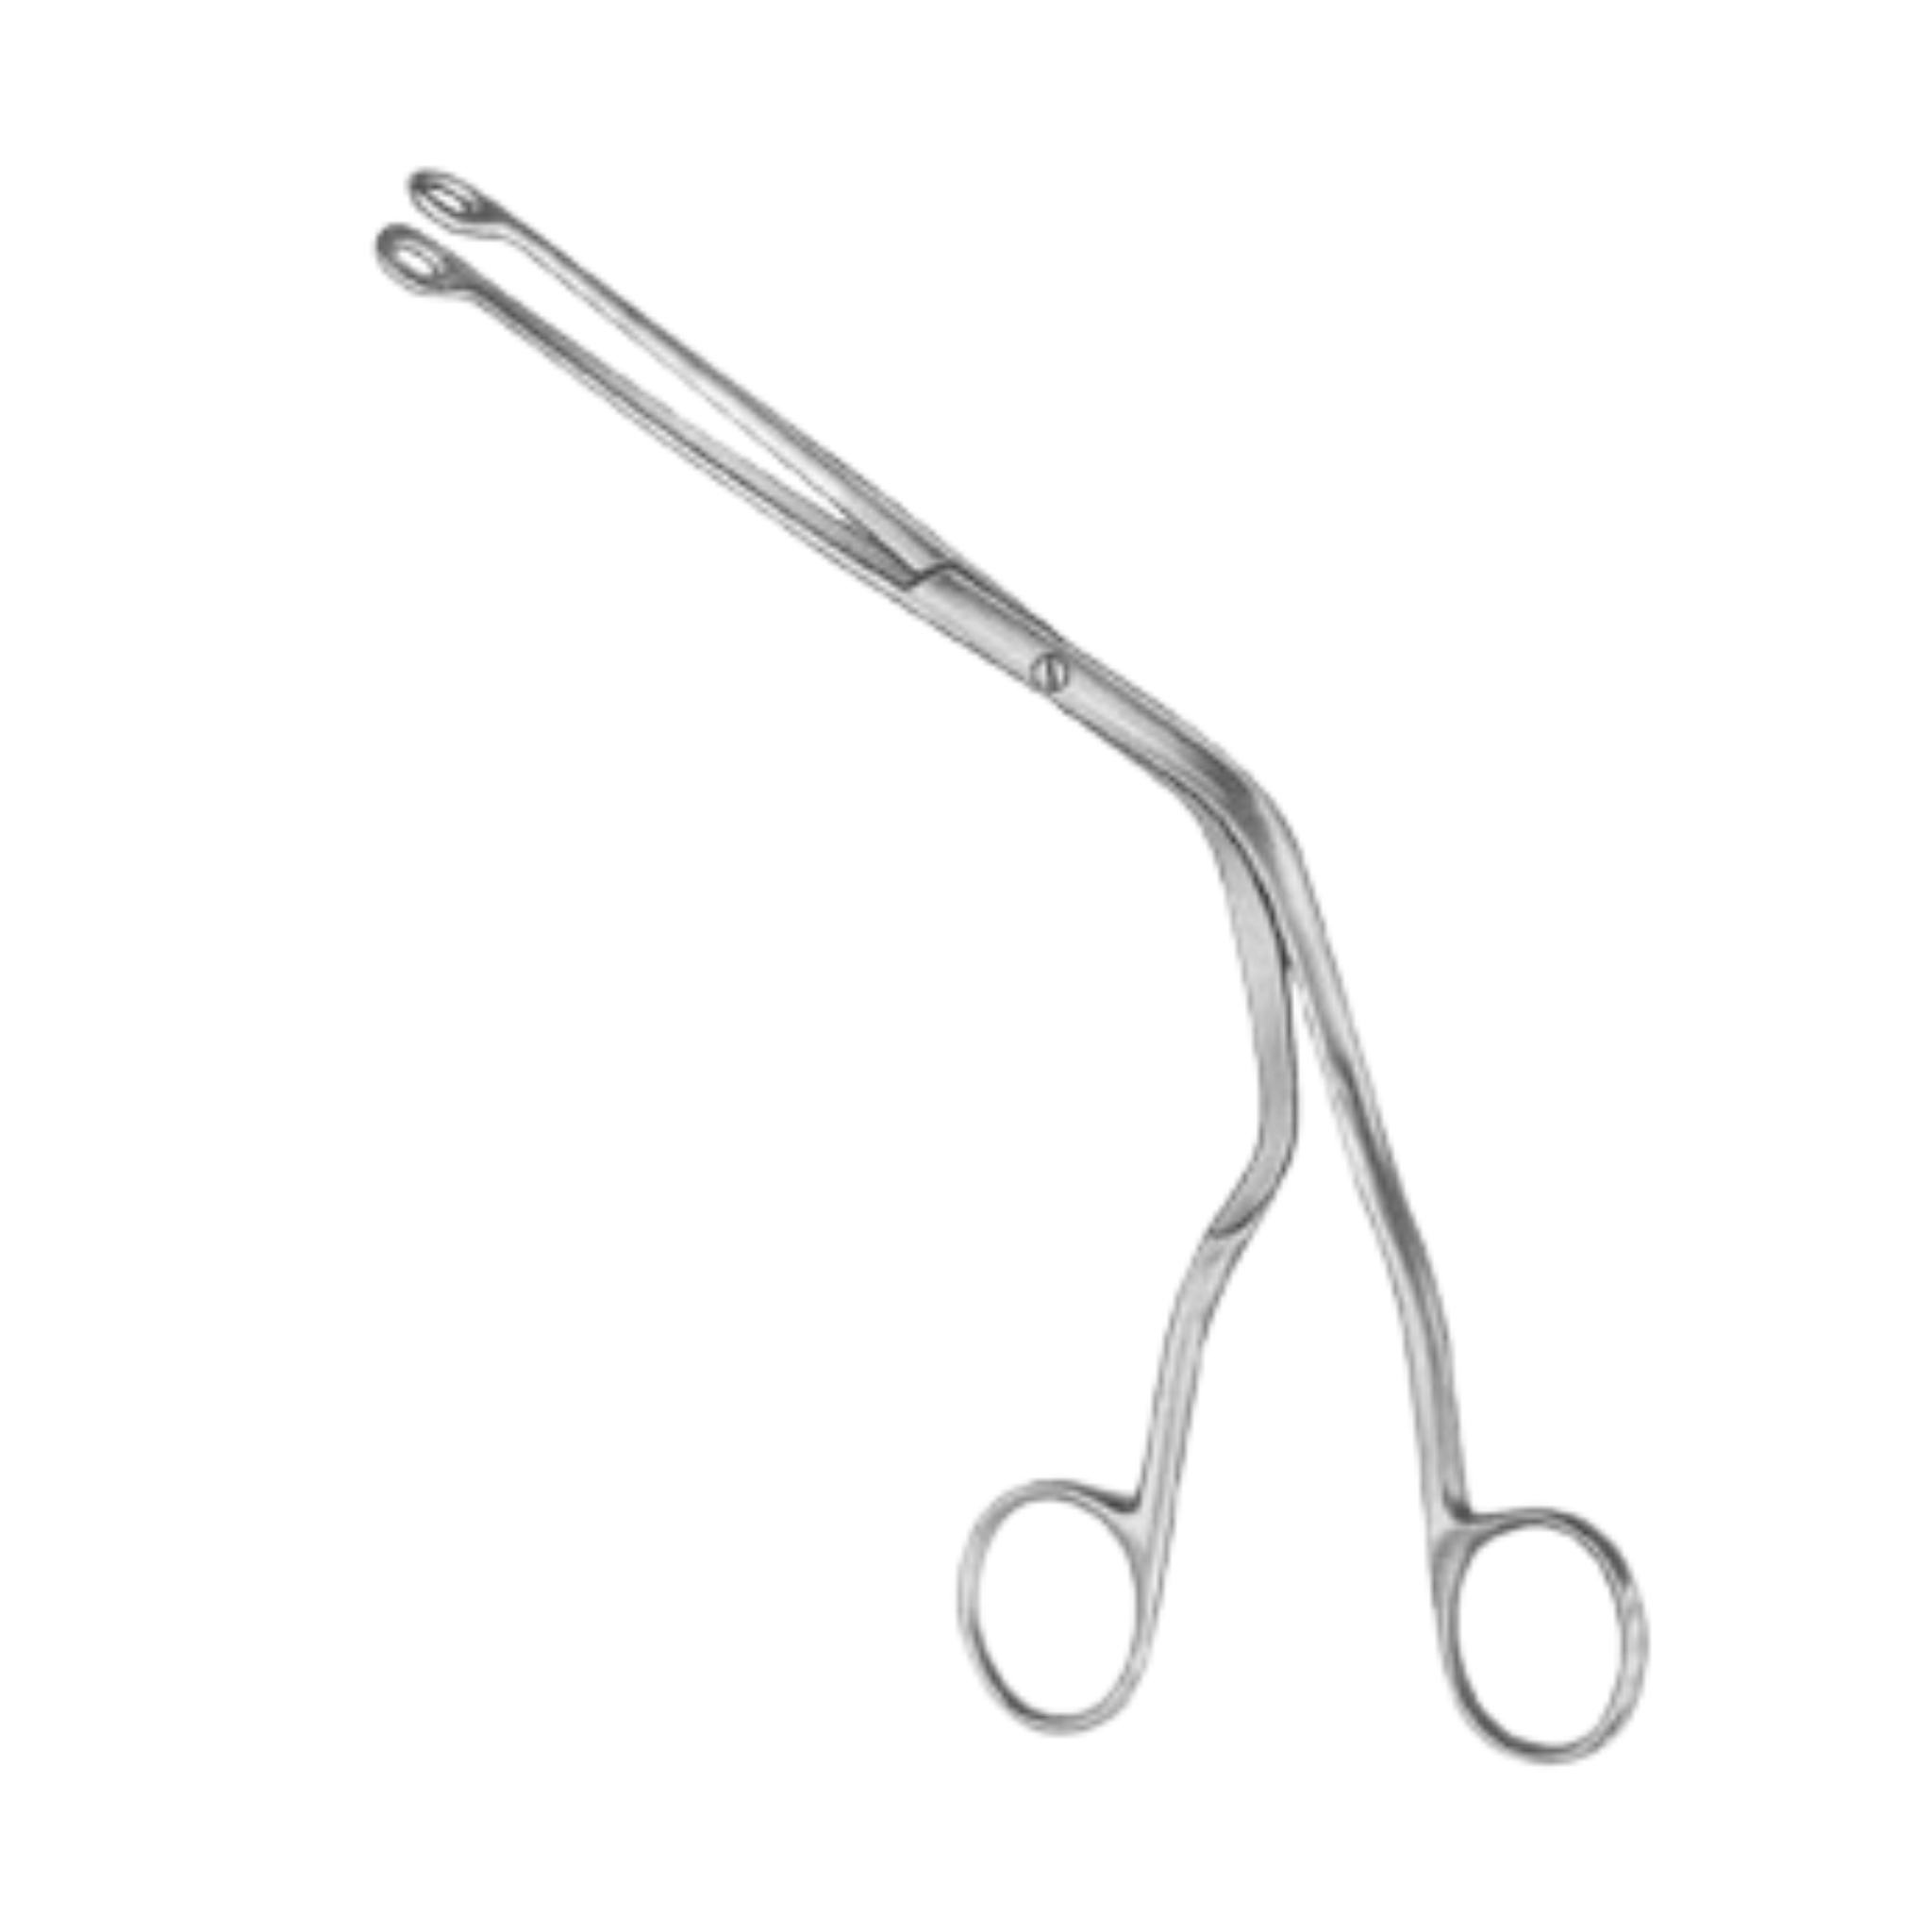 Magill Cathether Introducing Forceps- 25 cm